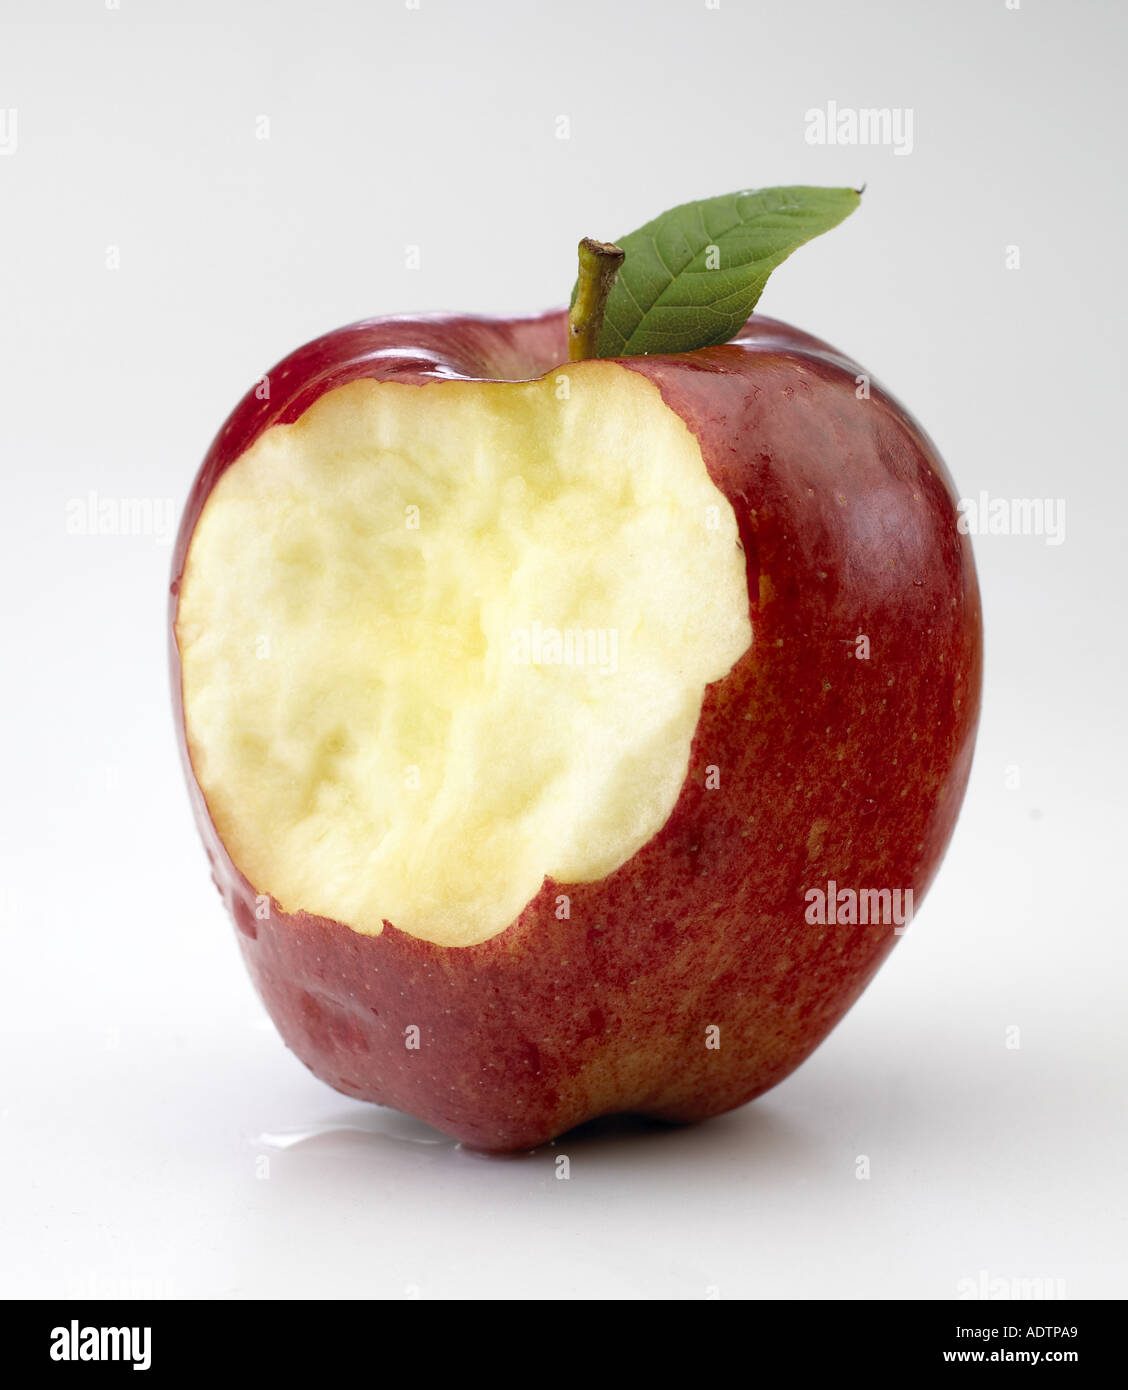 Red apple with bite taken Stock Photo